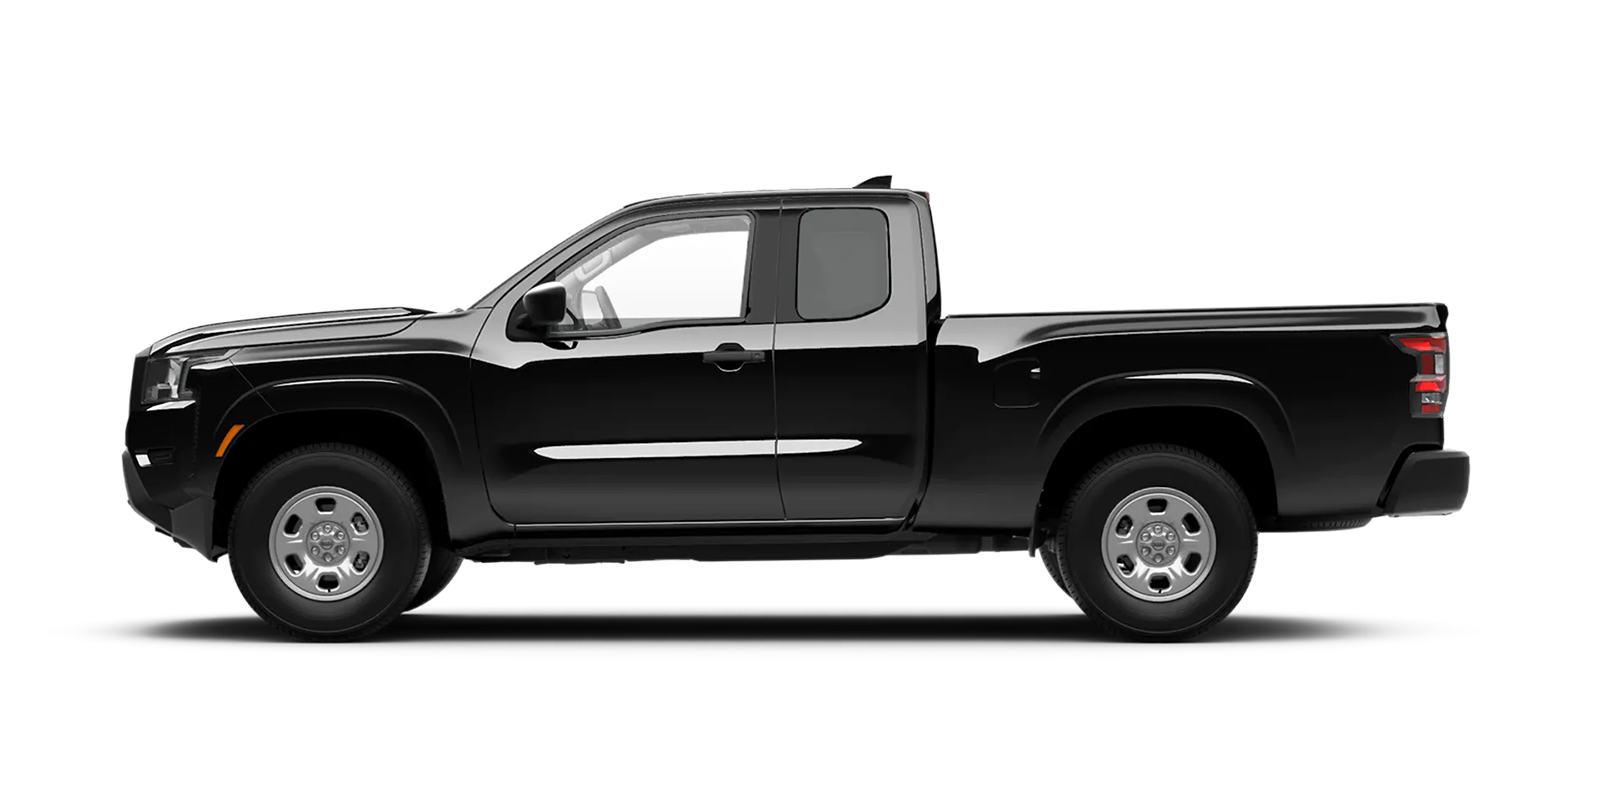 2022 Frontier King Cab S 4x4 in Super Black | Courtesy Nissan PA in Altoona PA